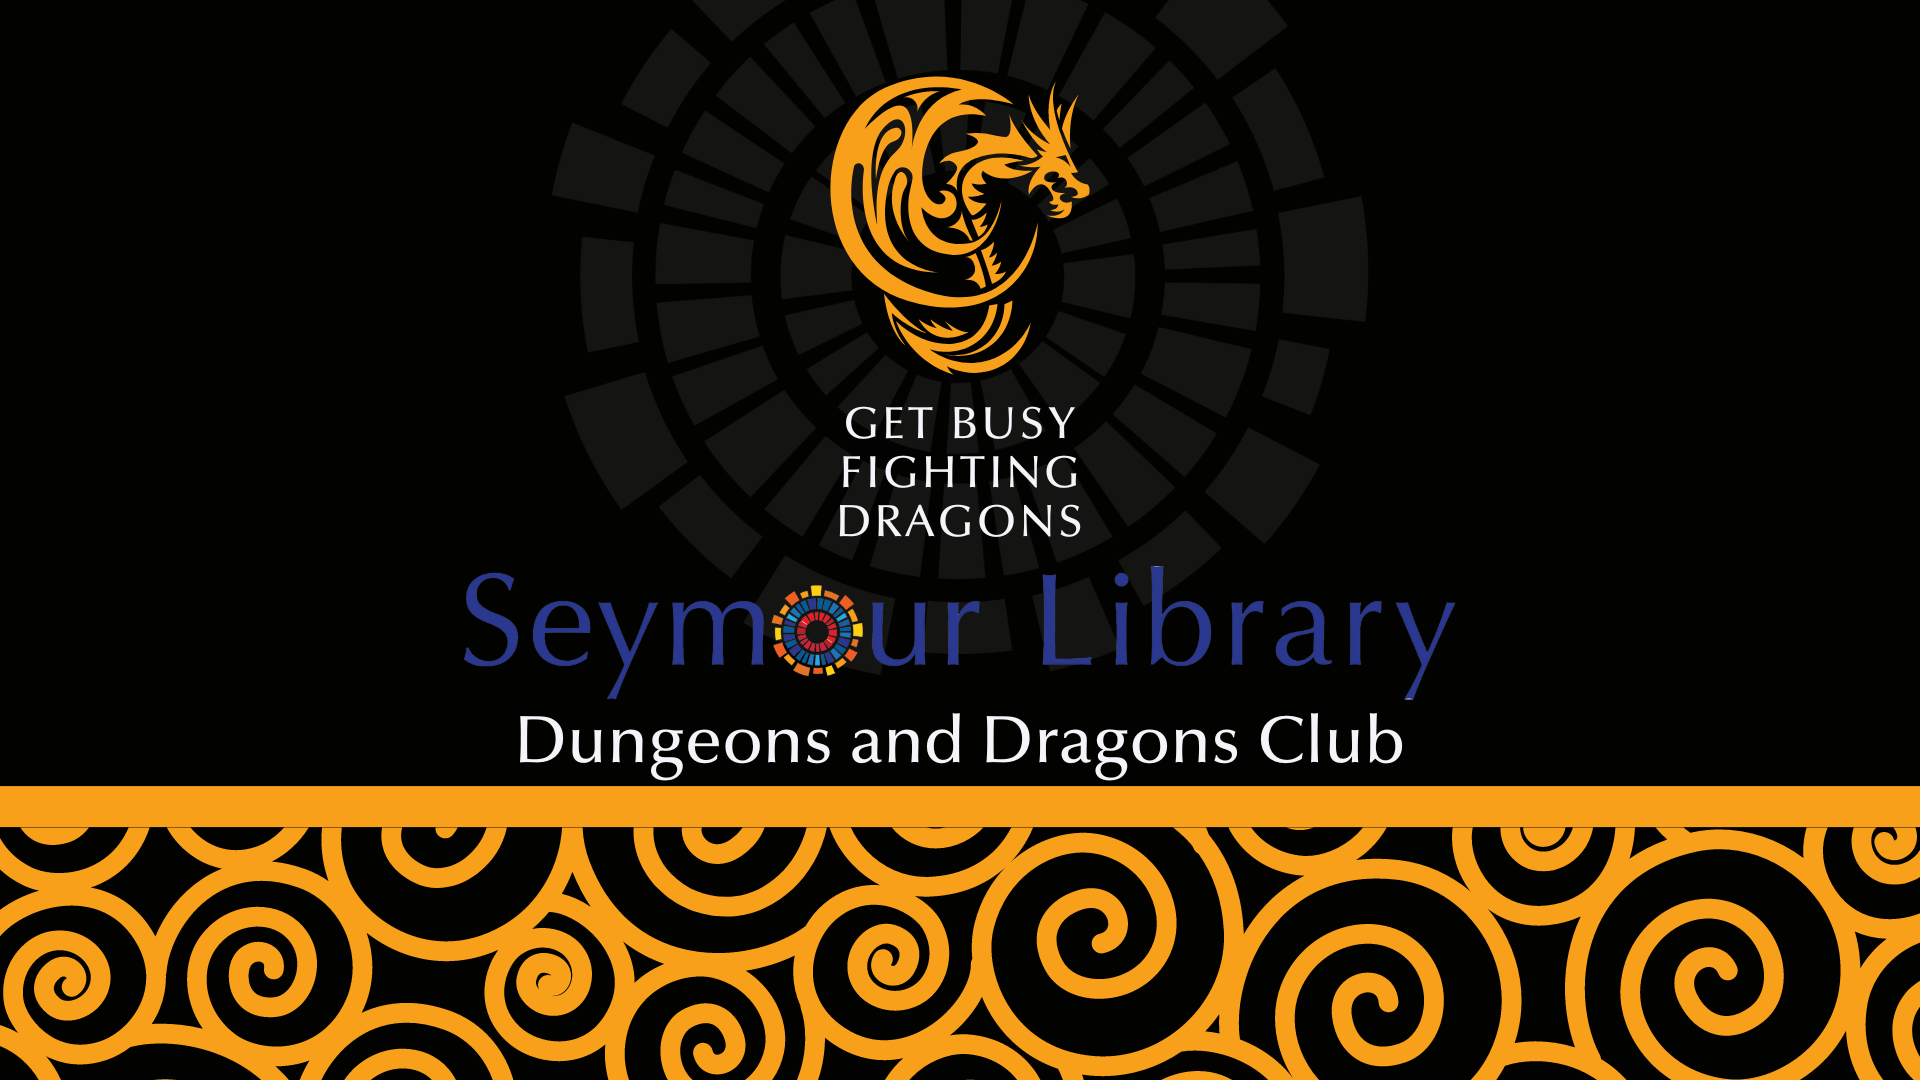 Dungeons and Dragons Club at Seymour Library - Get busy fighting dragons. Graphic with logo and stylized dragon and scrolls.